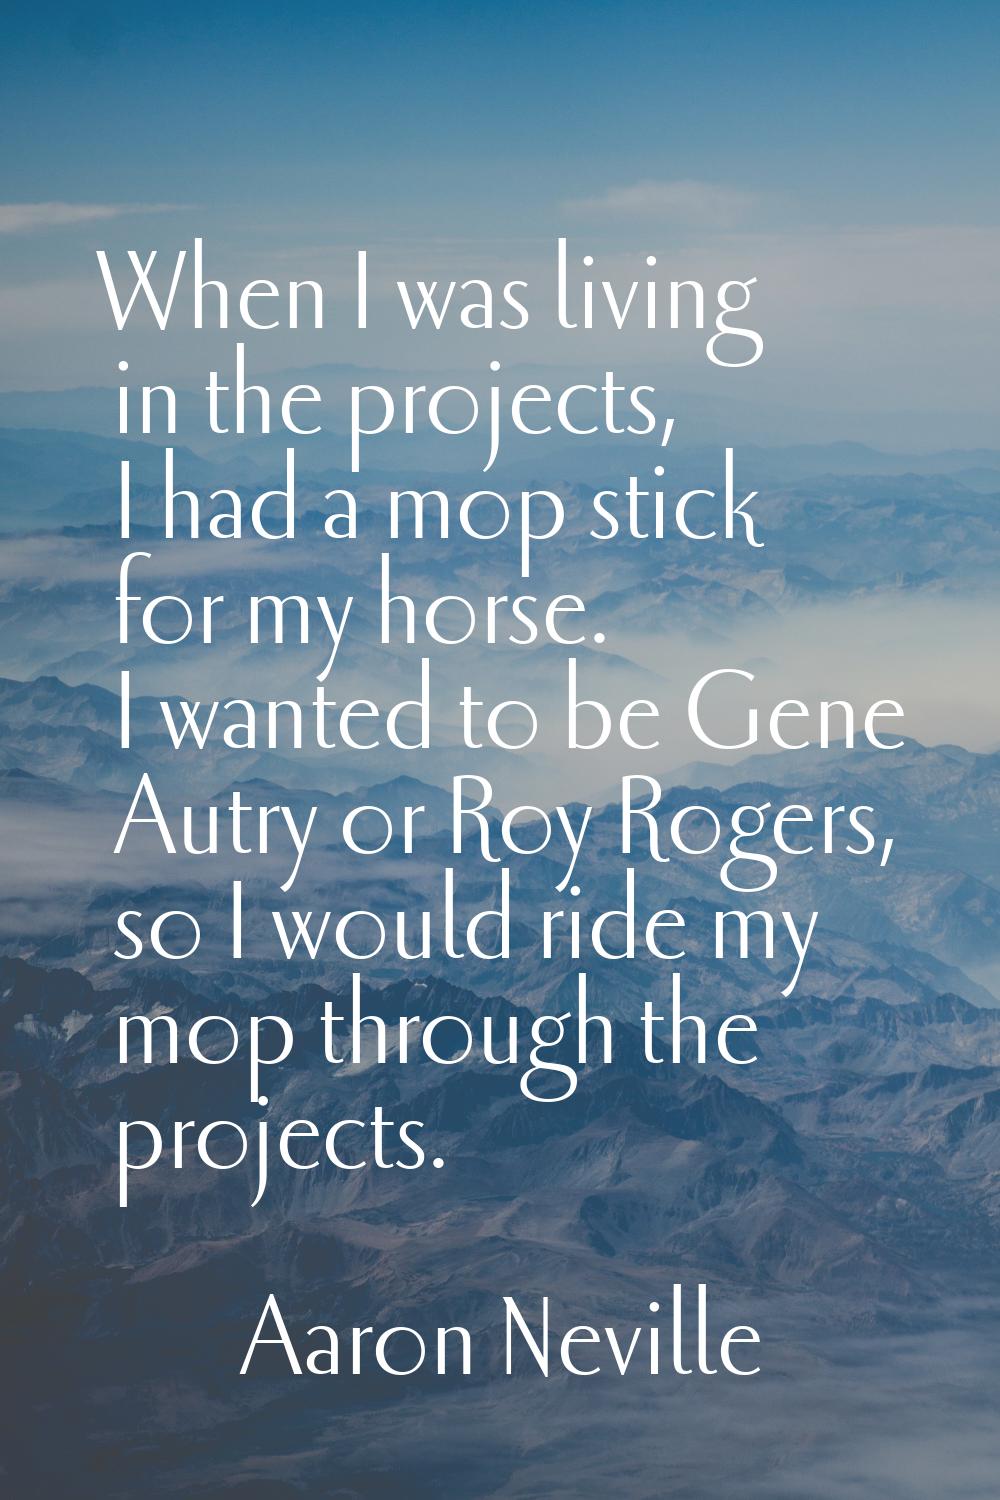 When I was living in the projects, I had a mop stick for my horse. I wanted to be Gene Autry or Roy